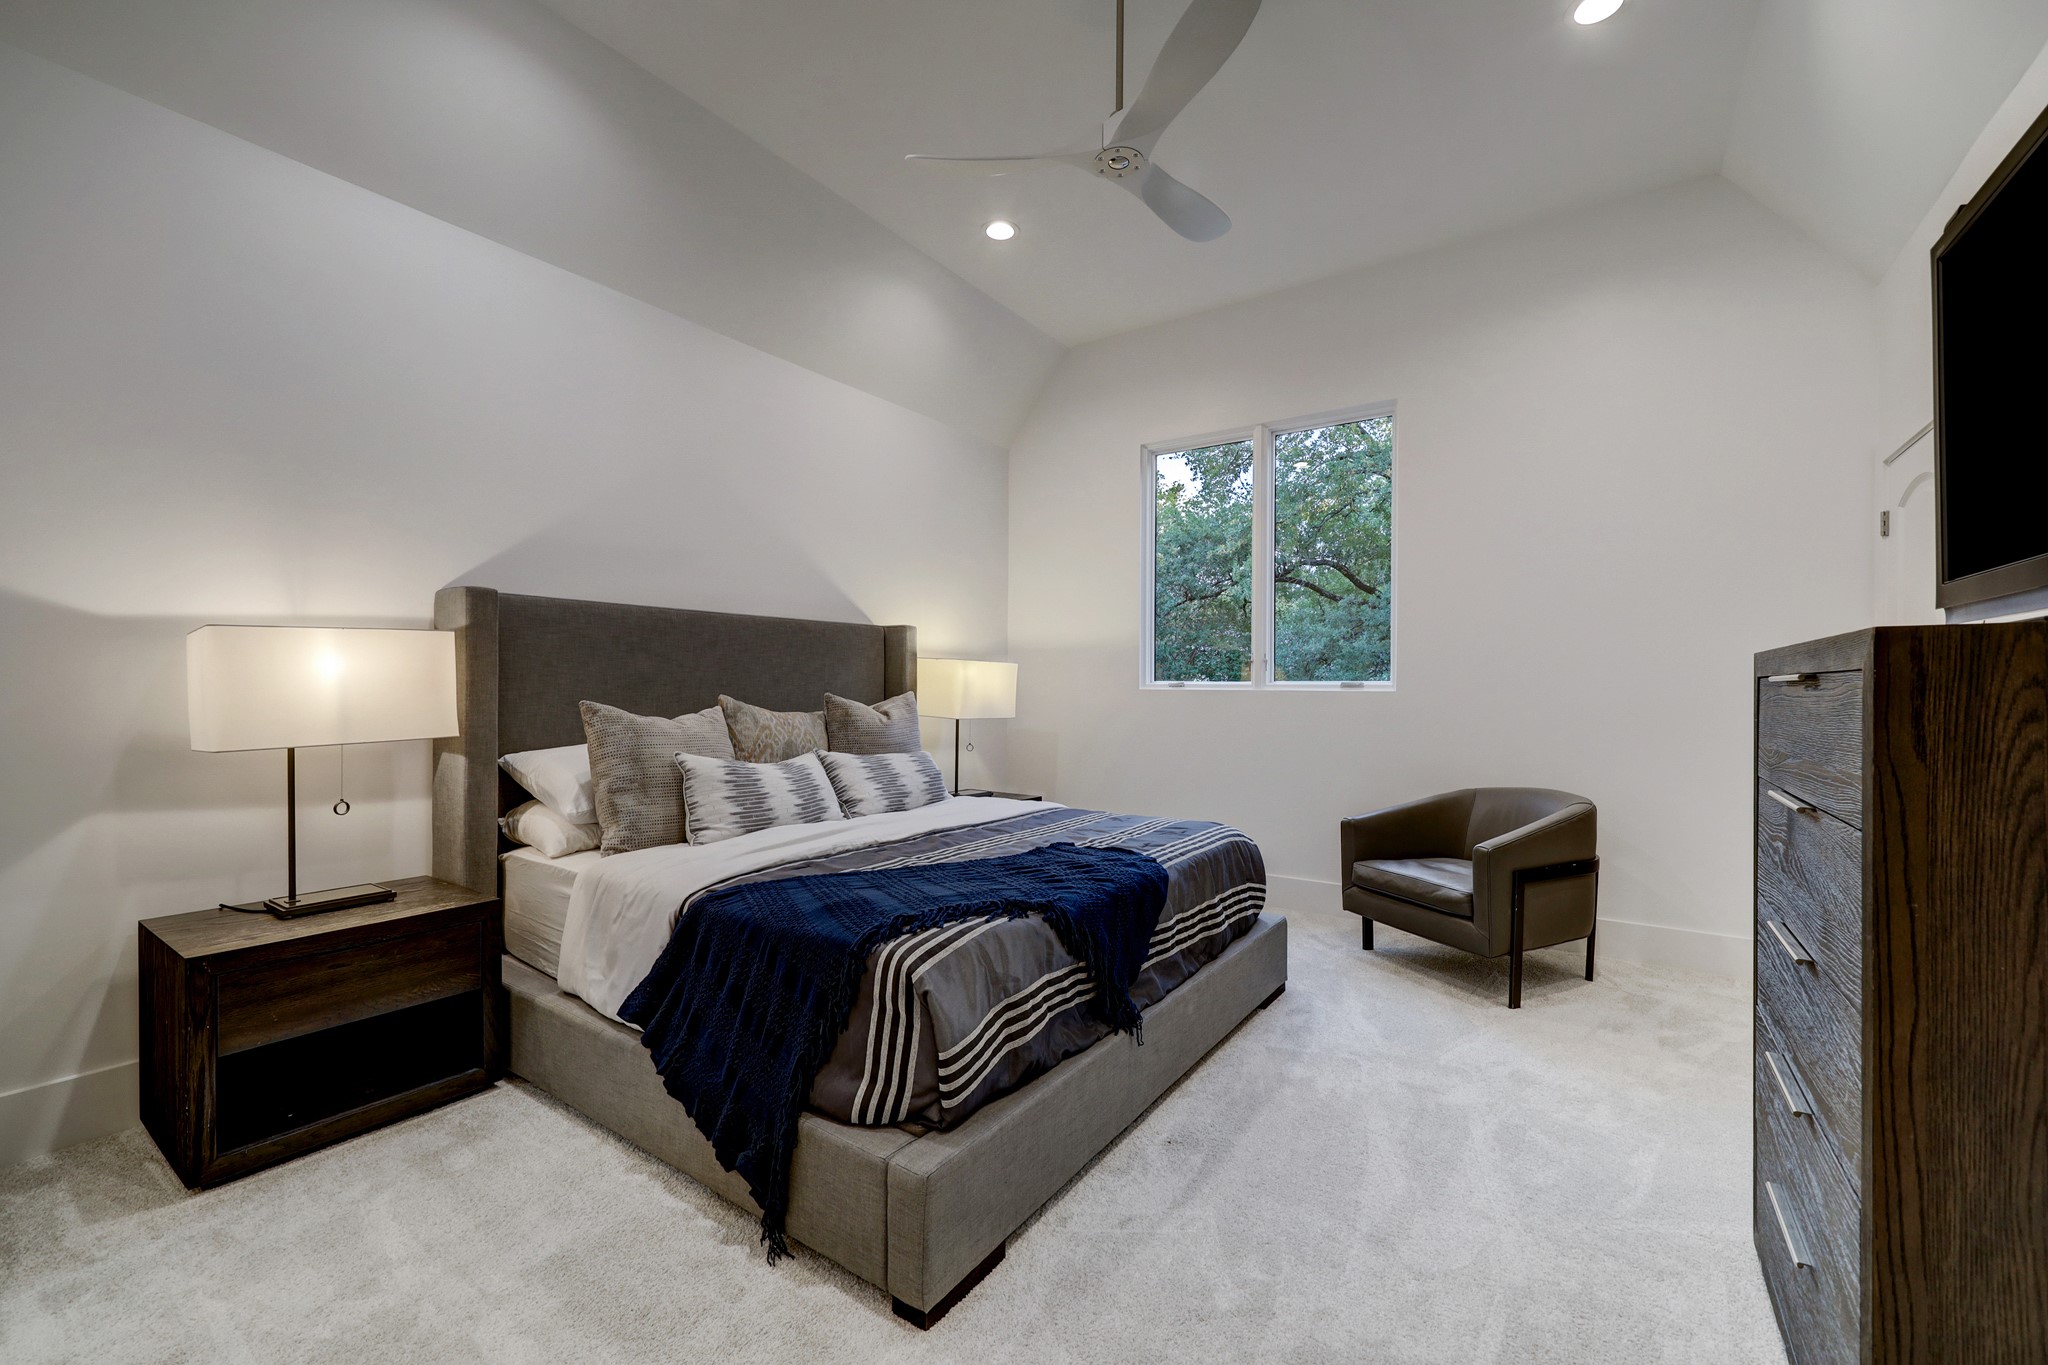 secondary bedroom with ensuite bath, generous closet and Monte Carlo ceiling fan.